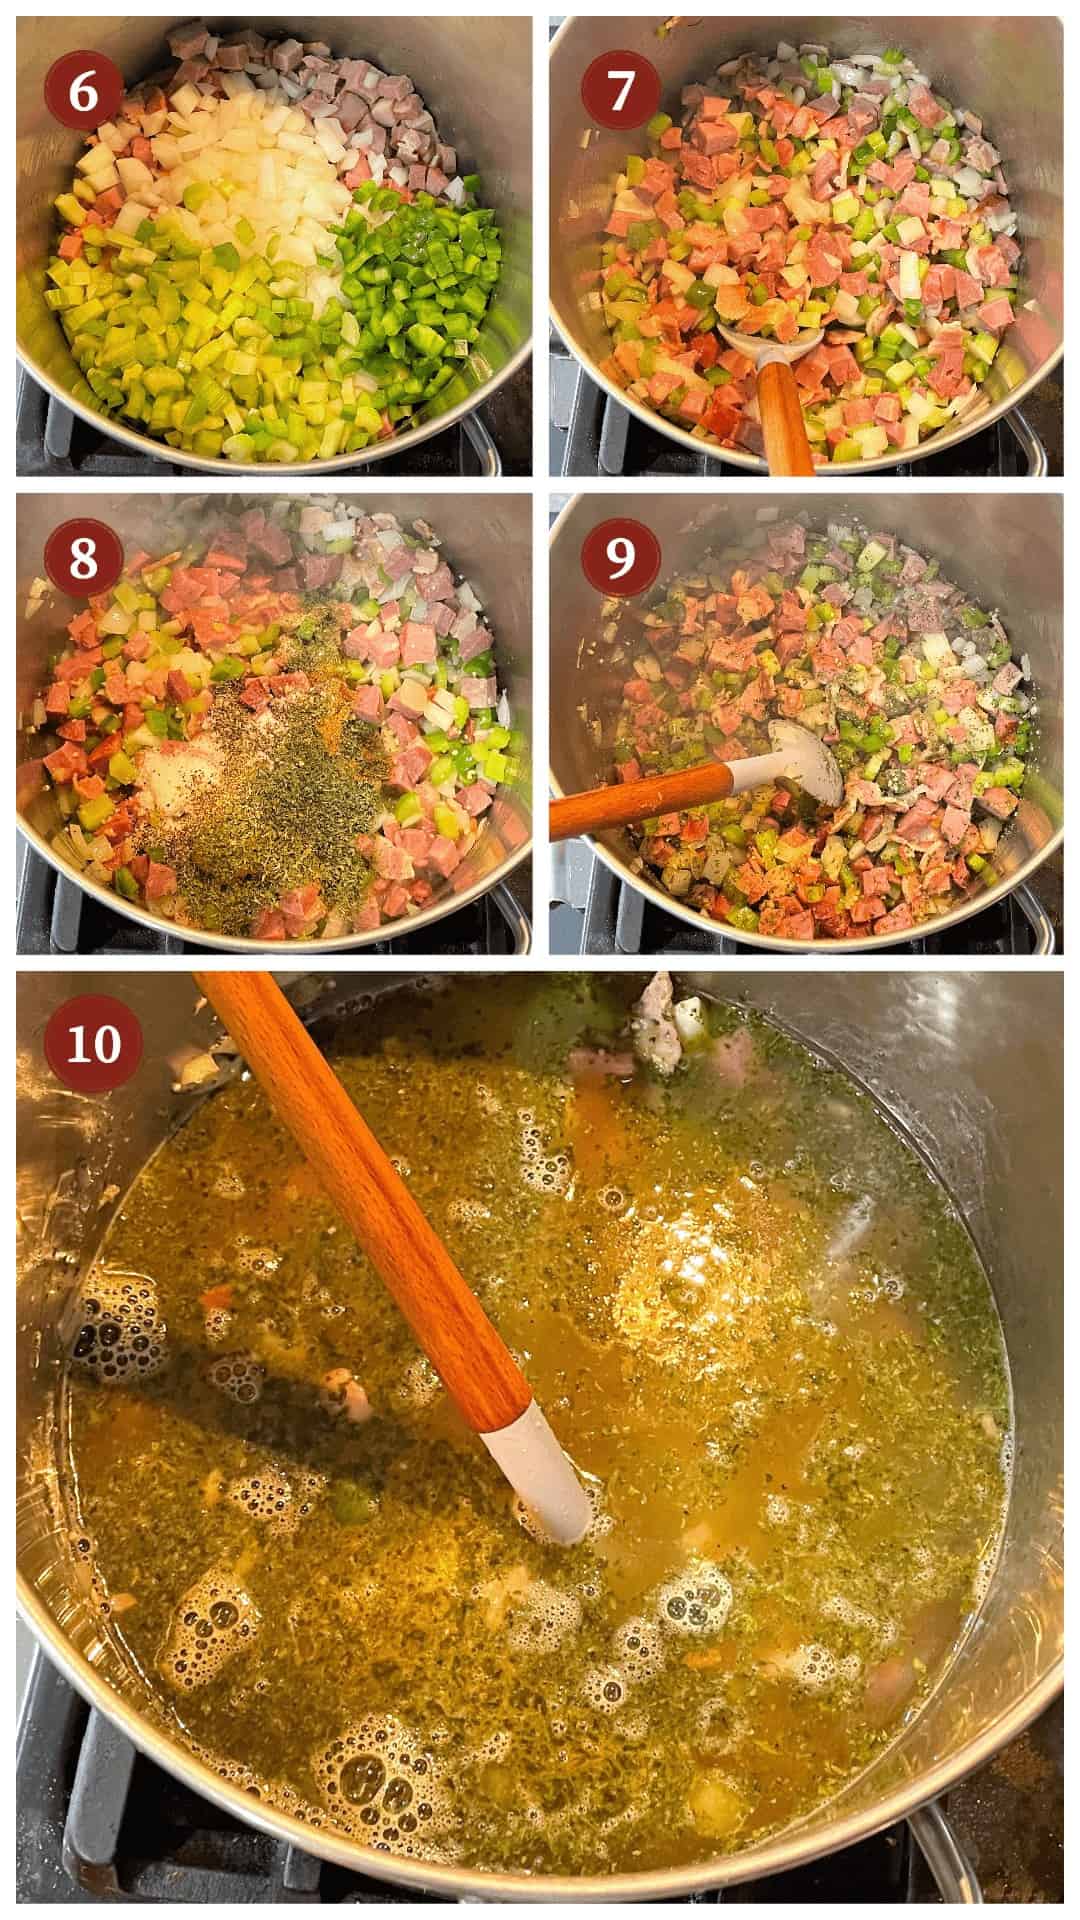 A collage of images showing how to make red beans and rice, steps 6-10.